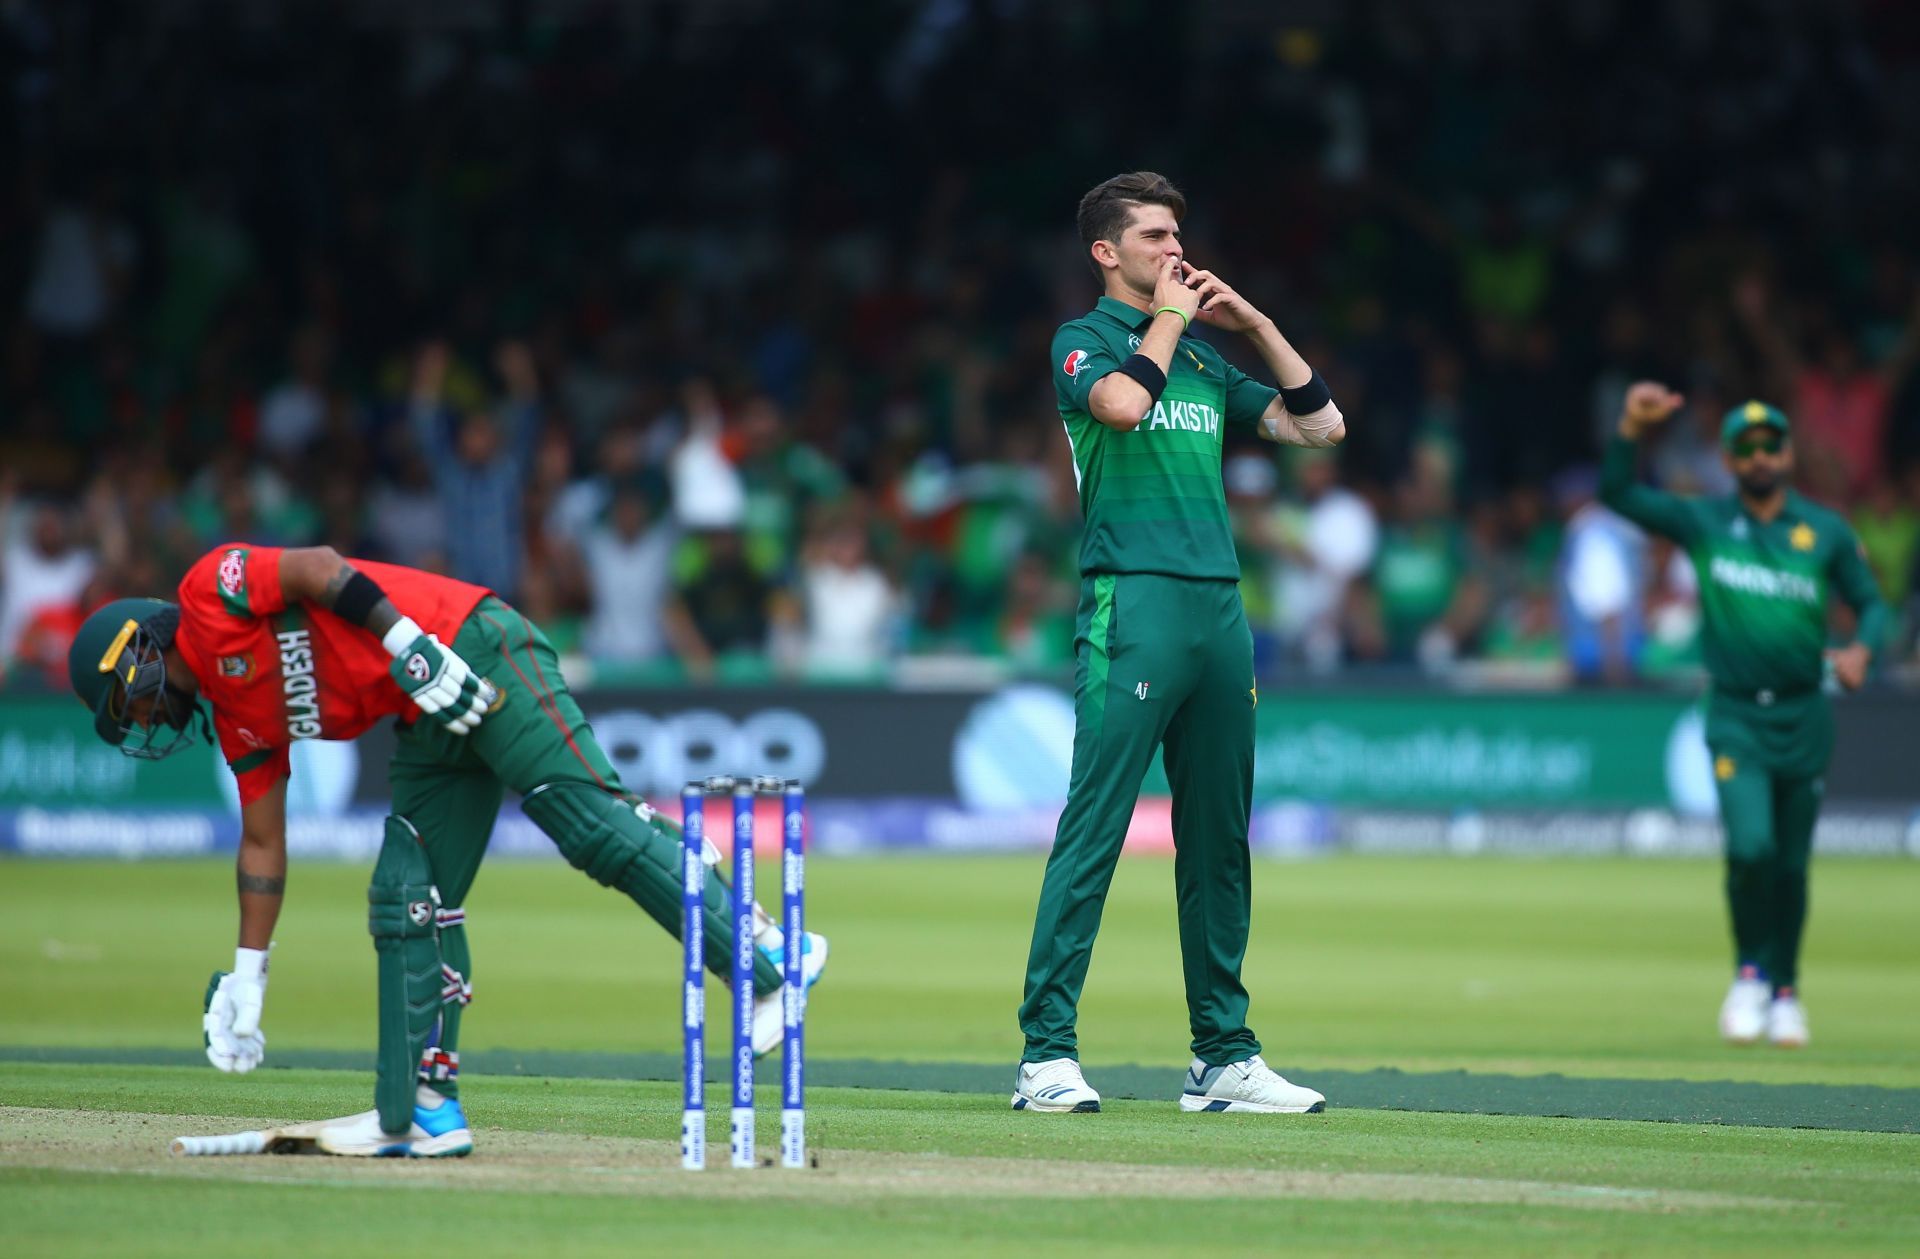 Pakistan v Bangladesh - ICC Cricket World Cup 2019. (Getty Images)